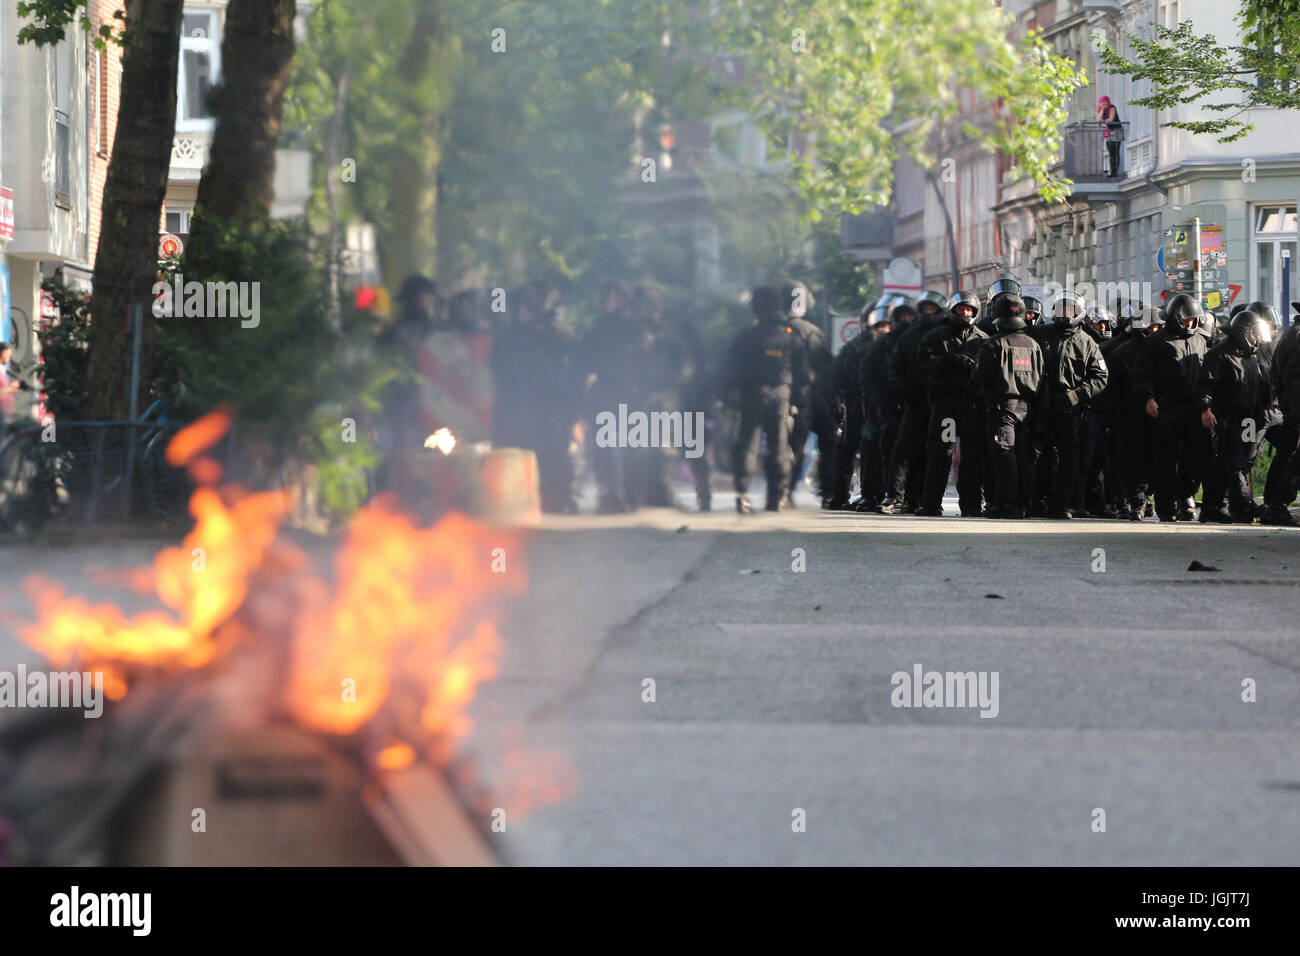 Hamburg, Germany. 07th July, 2017. G20 Summit protests in Hamburg. Police look on as barricade is set alight. Credit: Conall Kearney/Alamy Live News Stock Photo